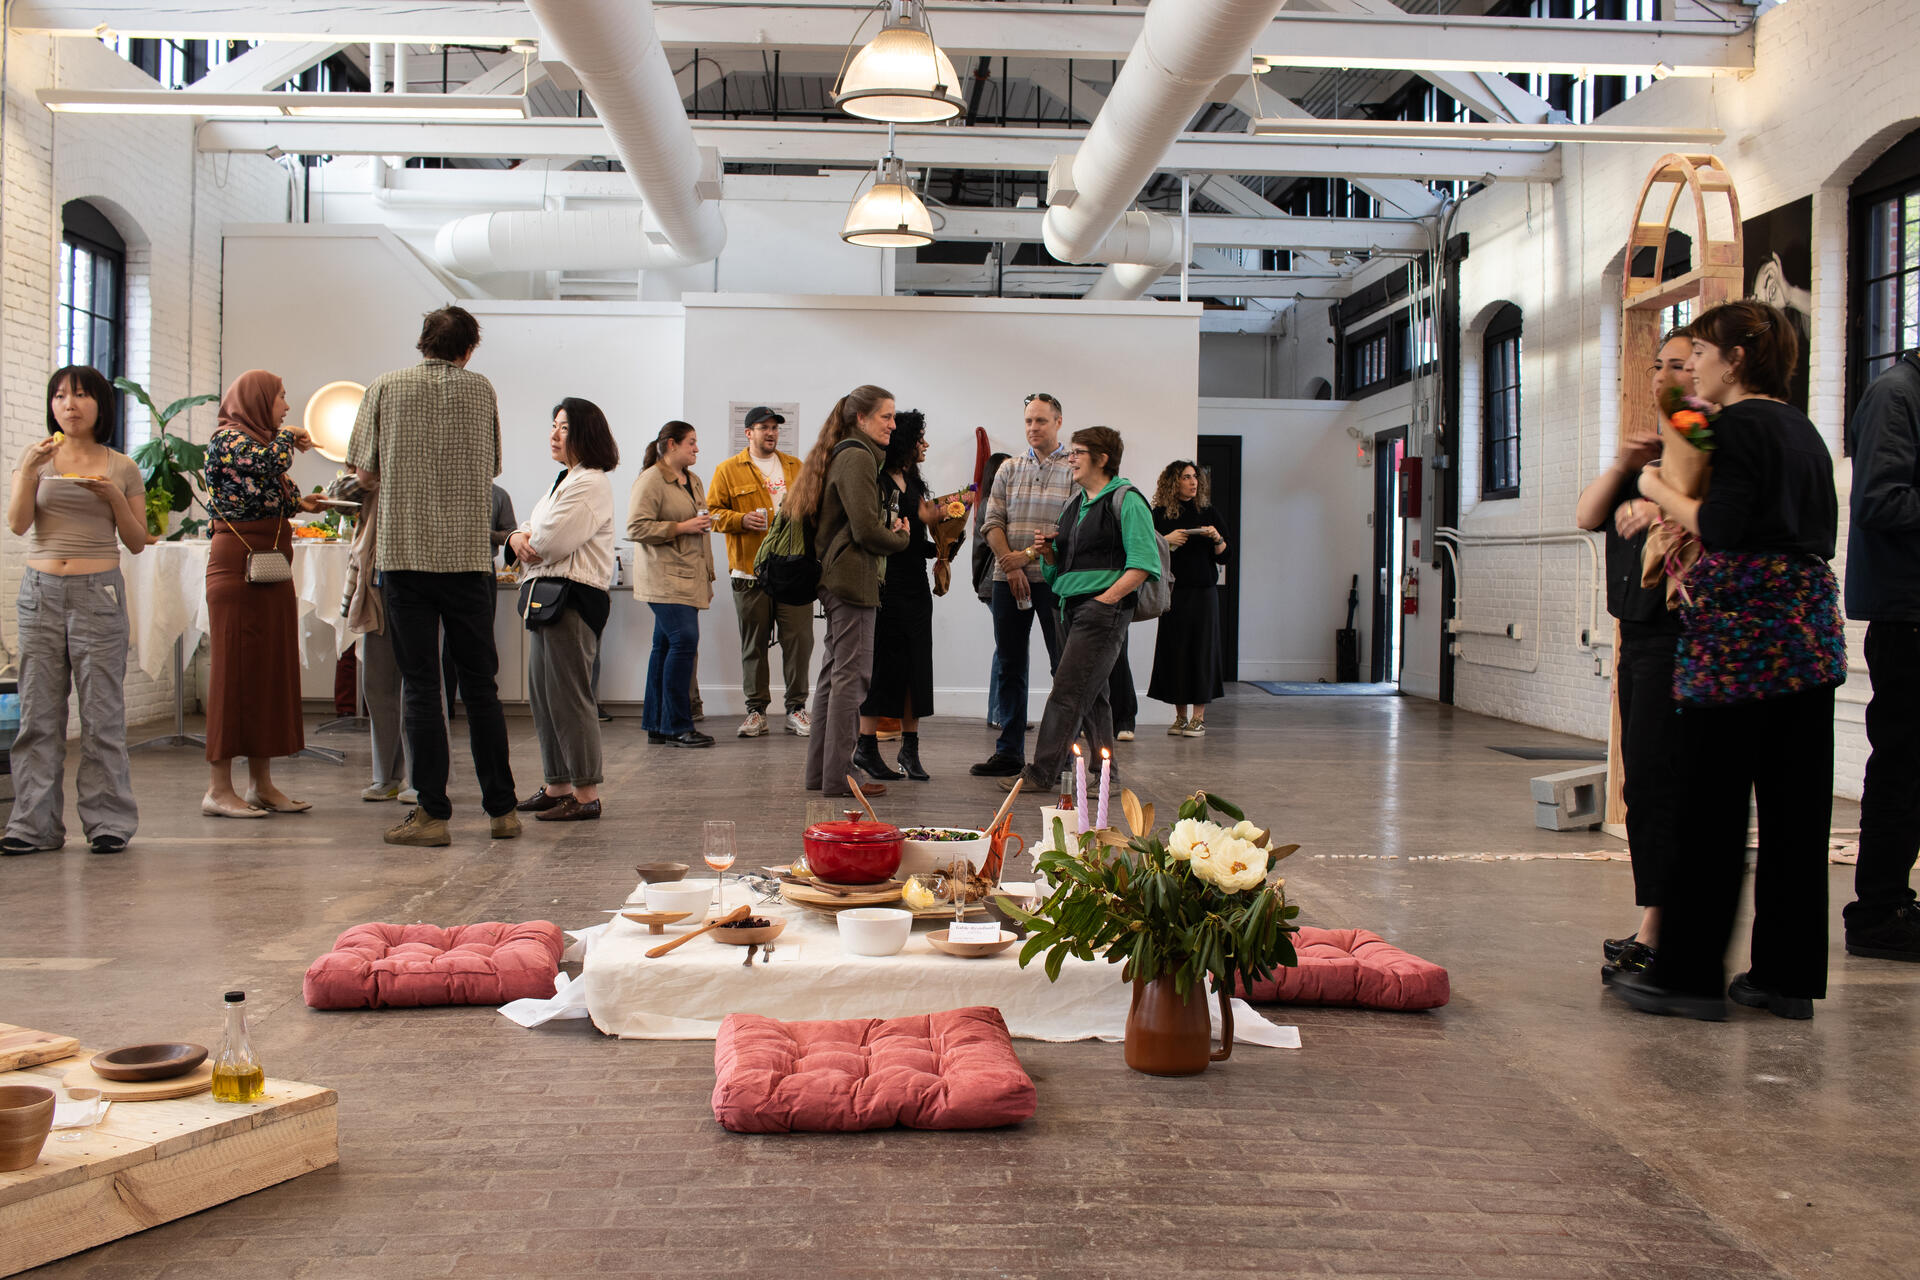 A low dining set up for four people in the middle of a gallery opening surrounded by people.